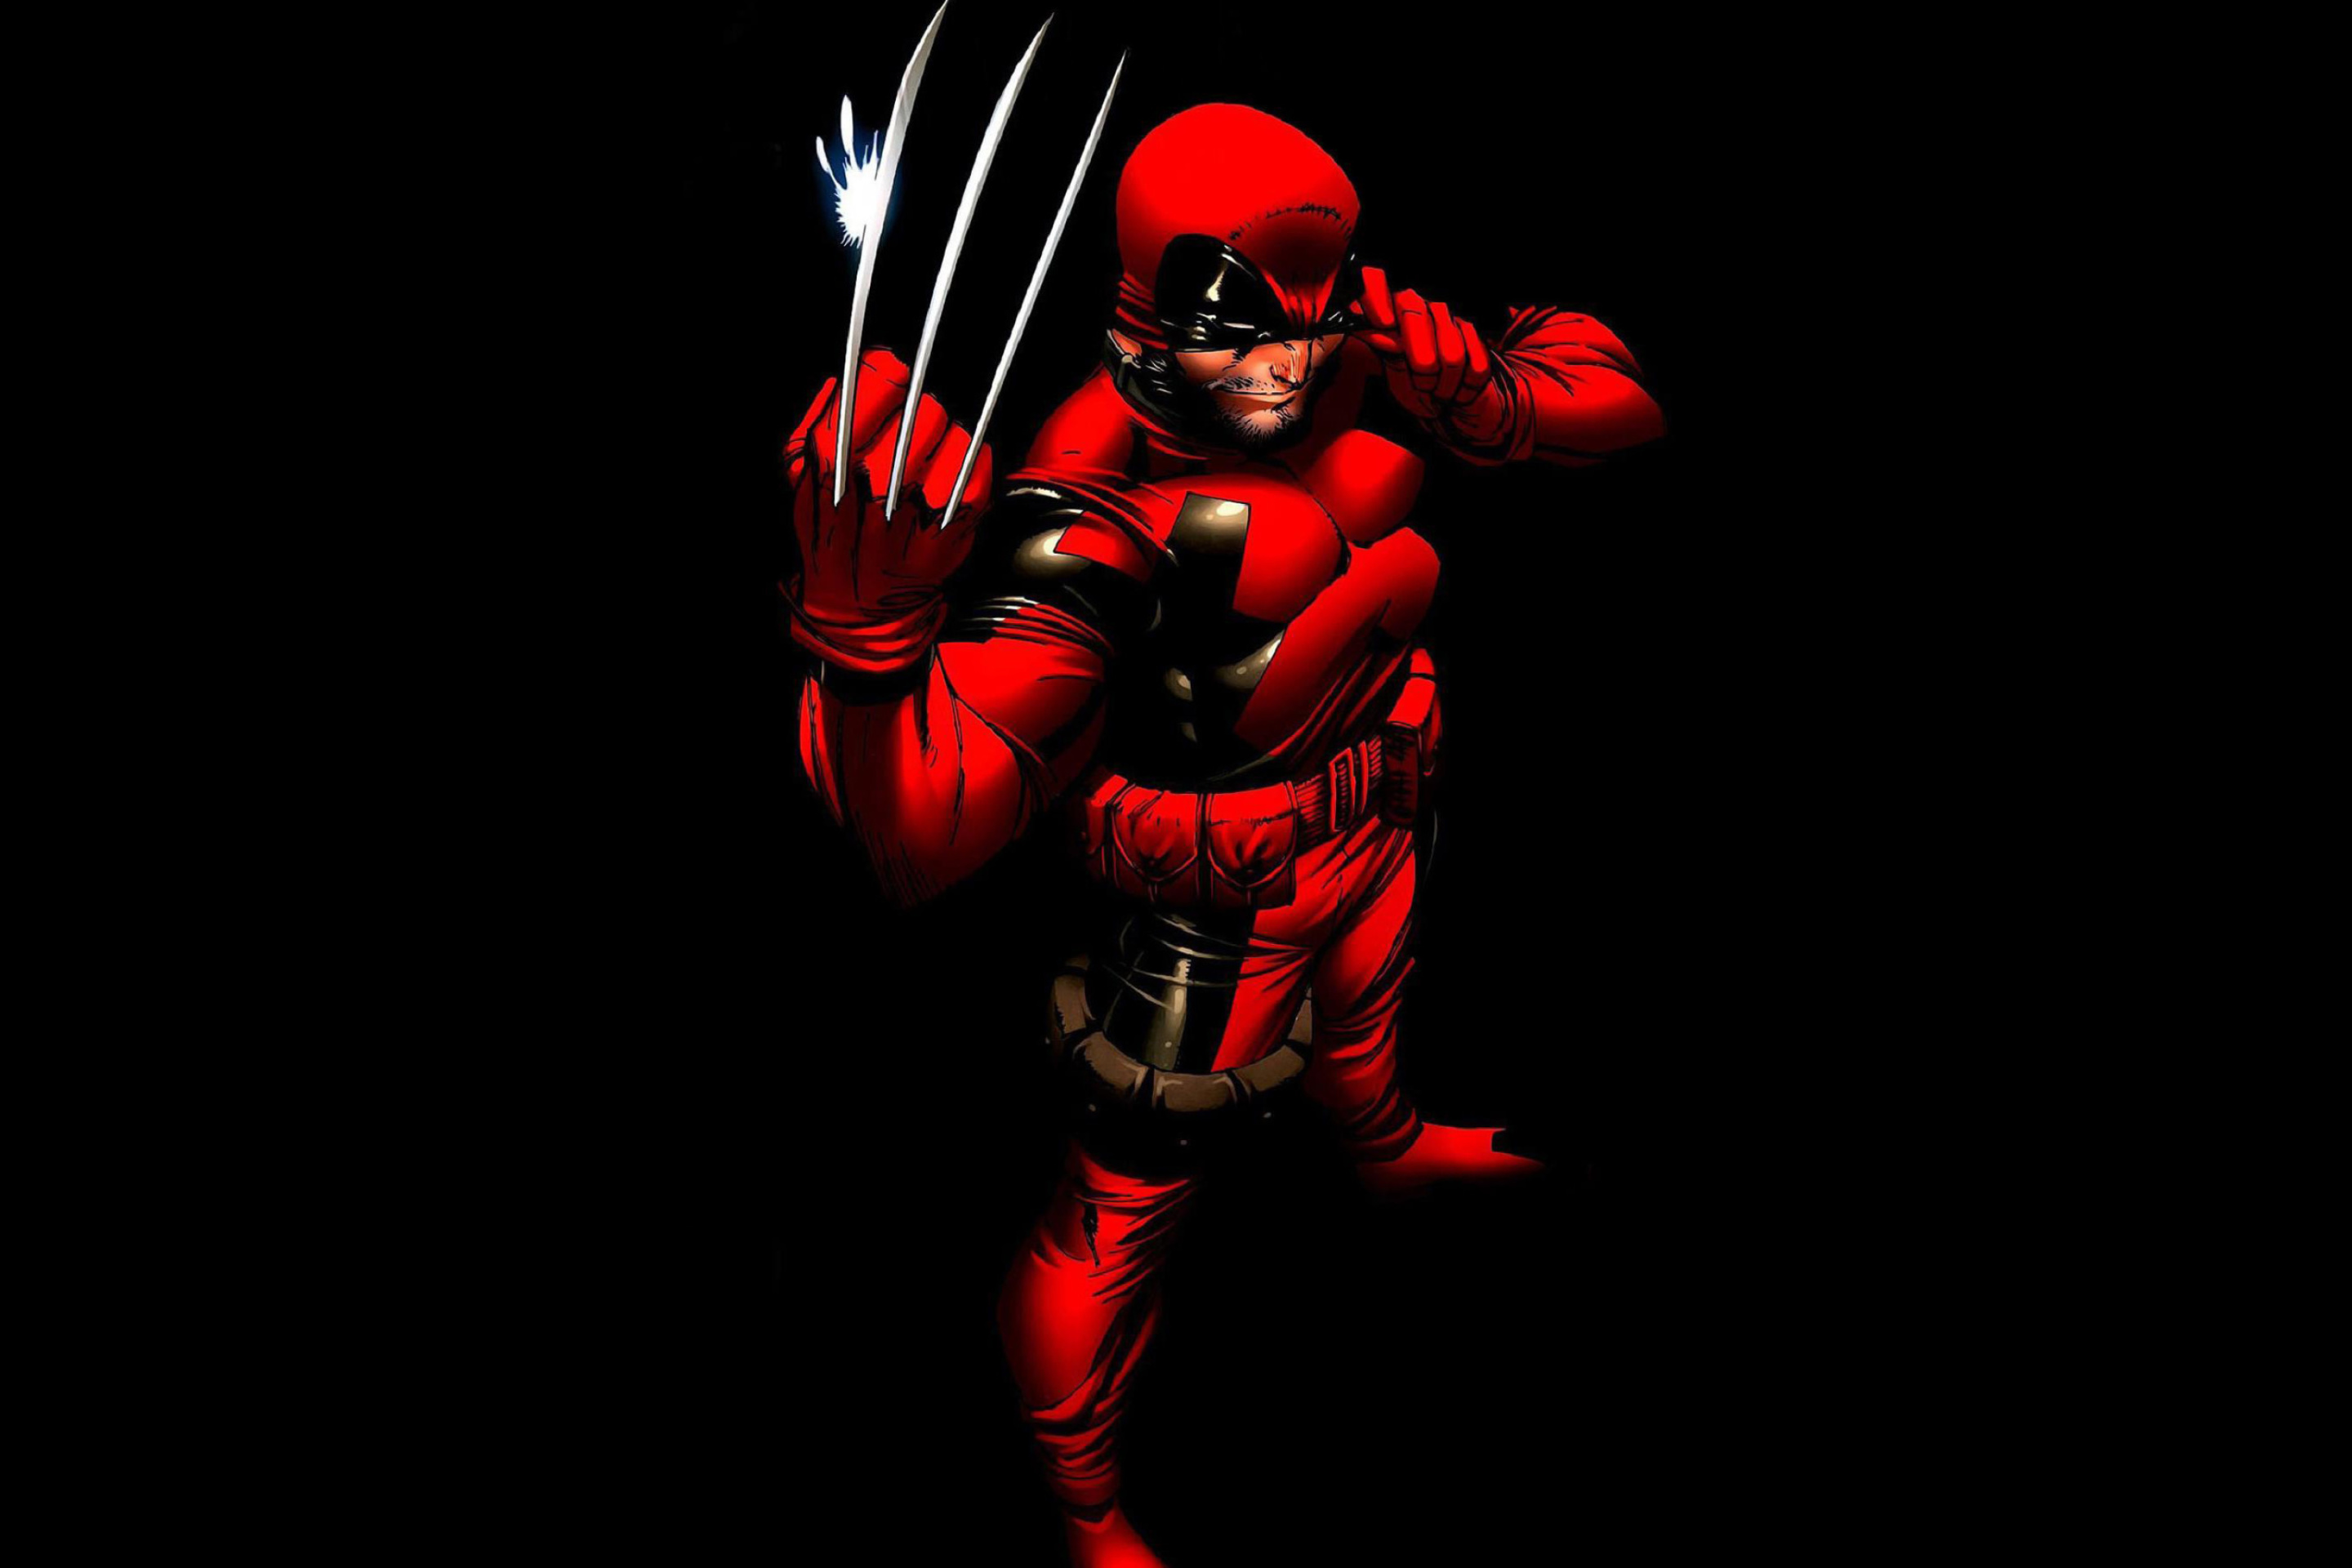 Wolverine in Red Costume wallpaper 2880x1920